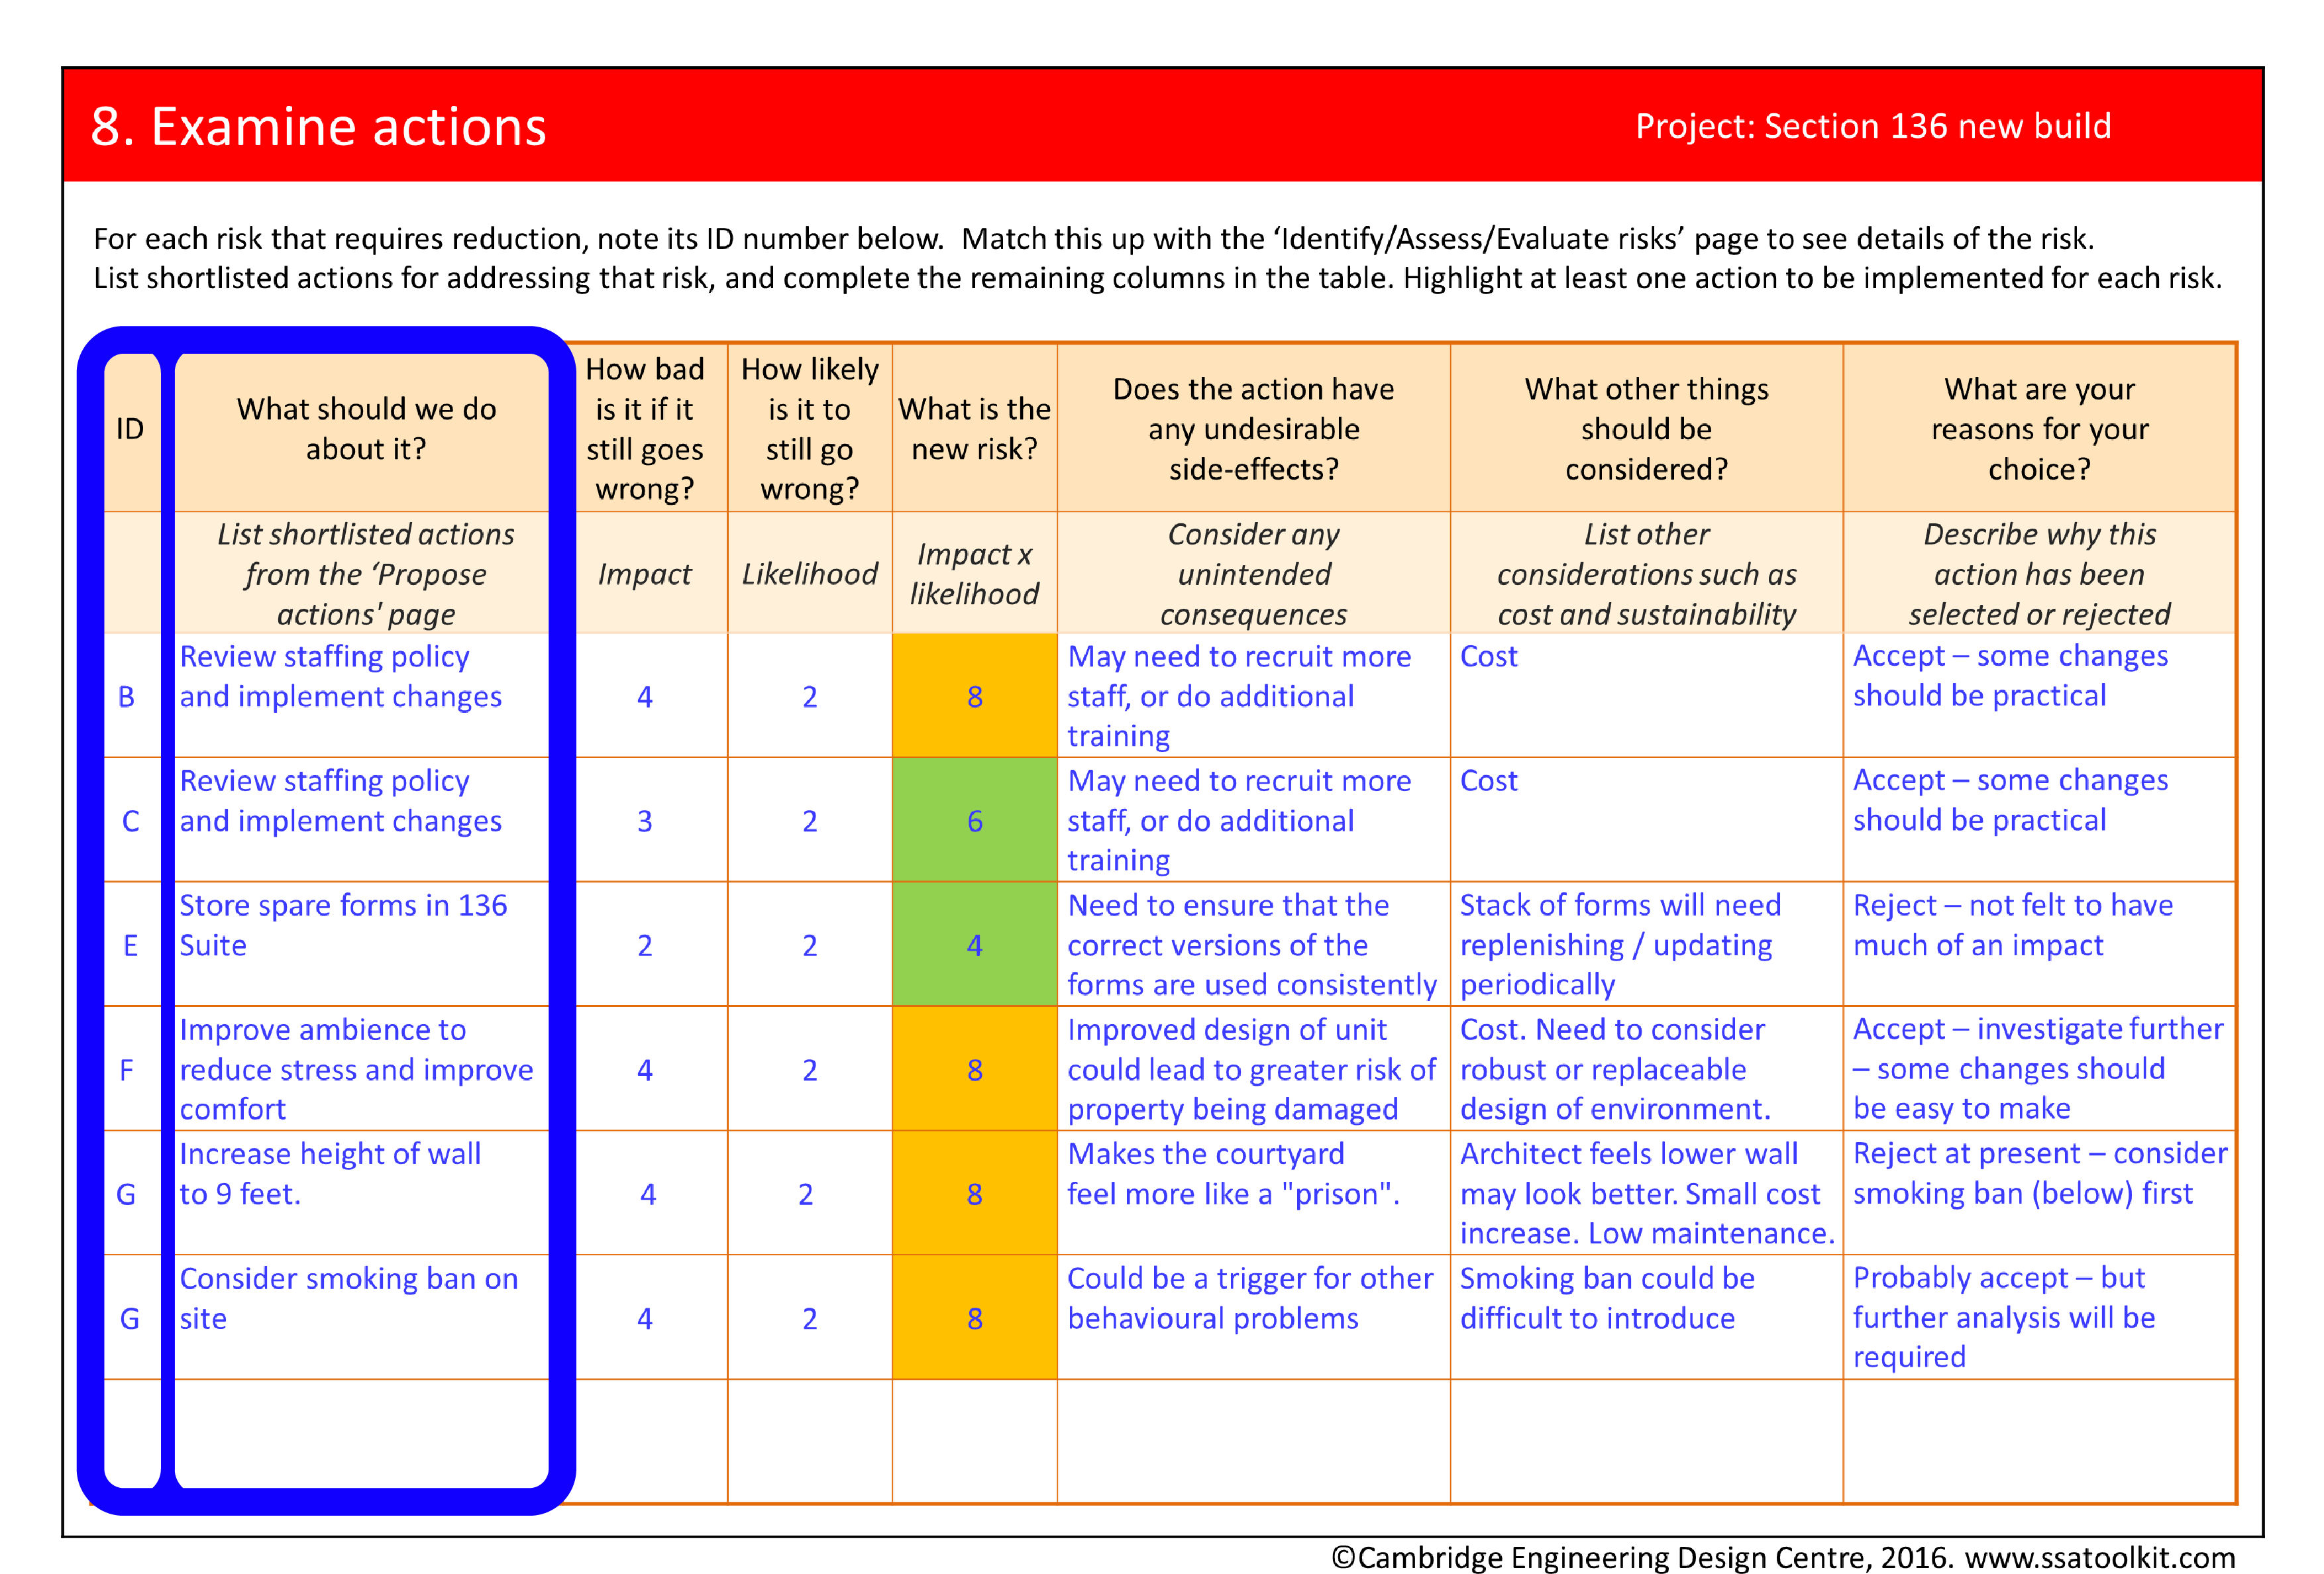 Screenshot of the Examine actions page from the Section 136 case study. Six risks are listed along with possible actions for addressing them. For example,a proposed action for addressing risks B and C (staffing issues) are to review staffing policy and implement changes. A proposed action for risk E (incorrect paperwork) is to store spare forms in the 136 Suite. The full assessment form in pdf is available from the Resources page.